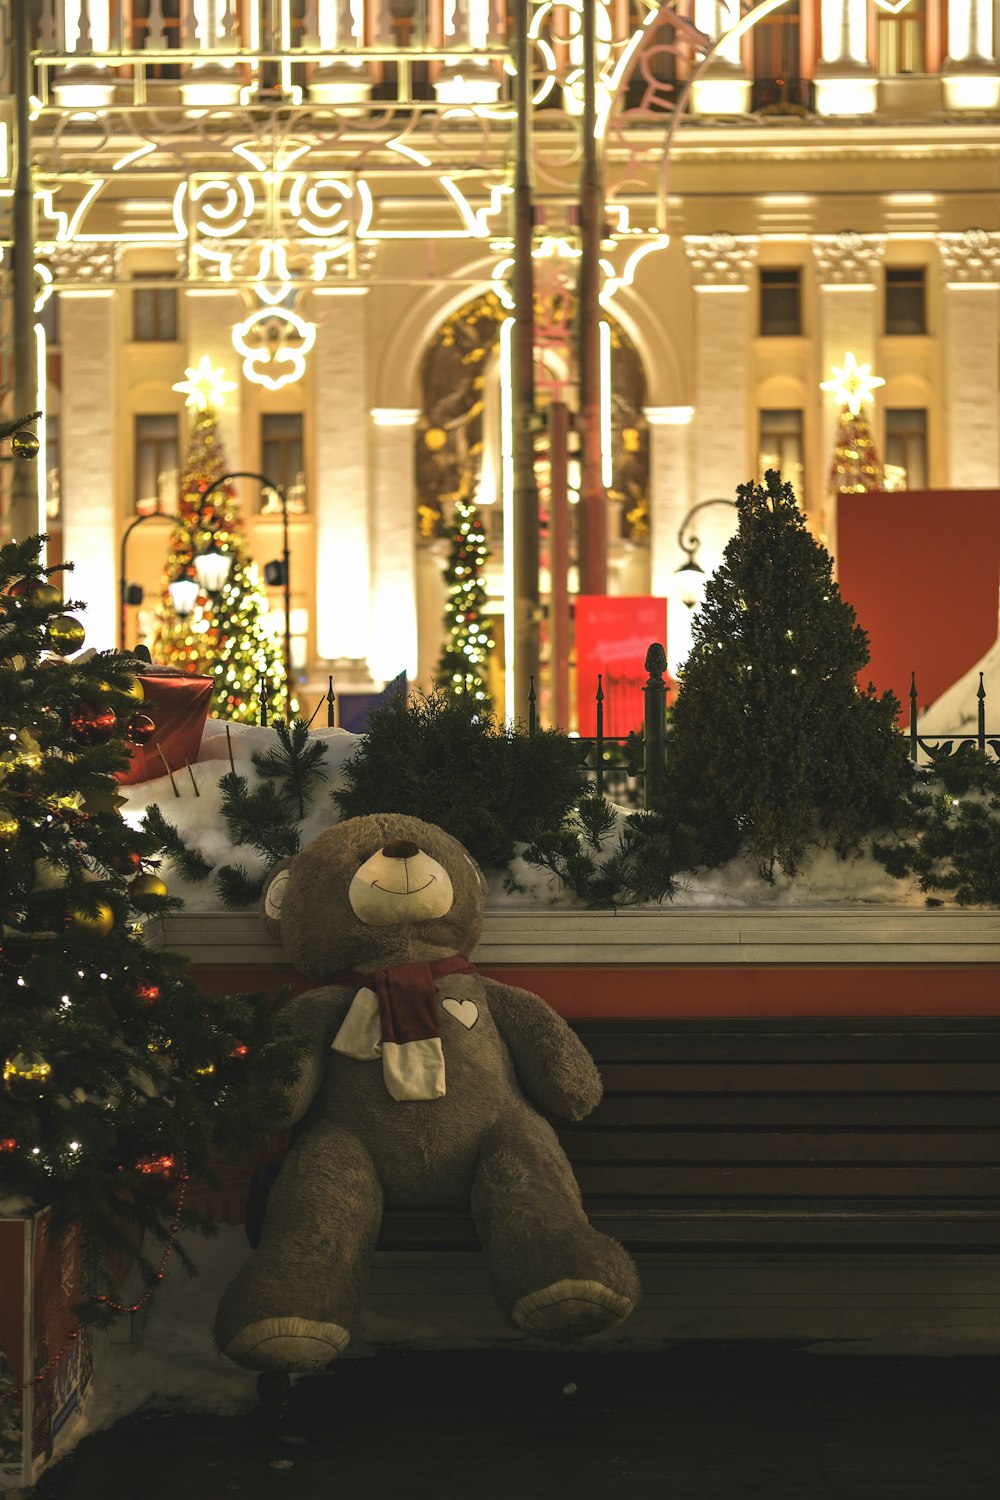 a teddy bear sitting on a bench in front of a building